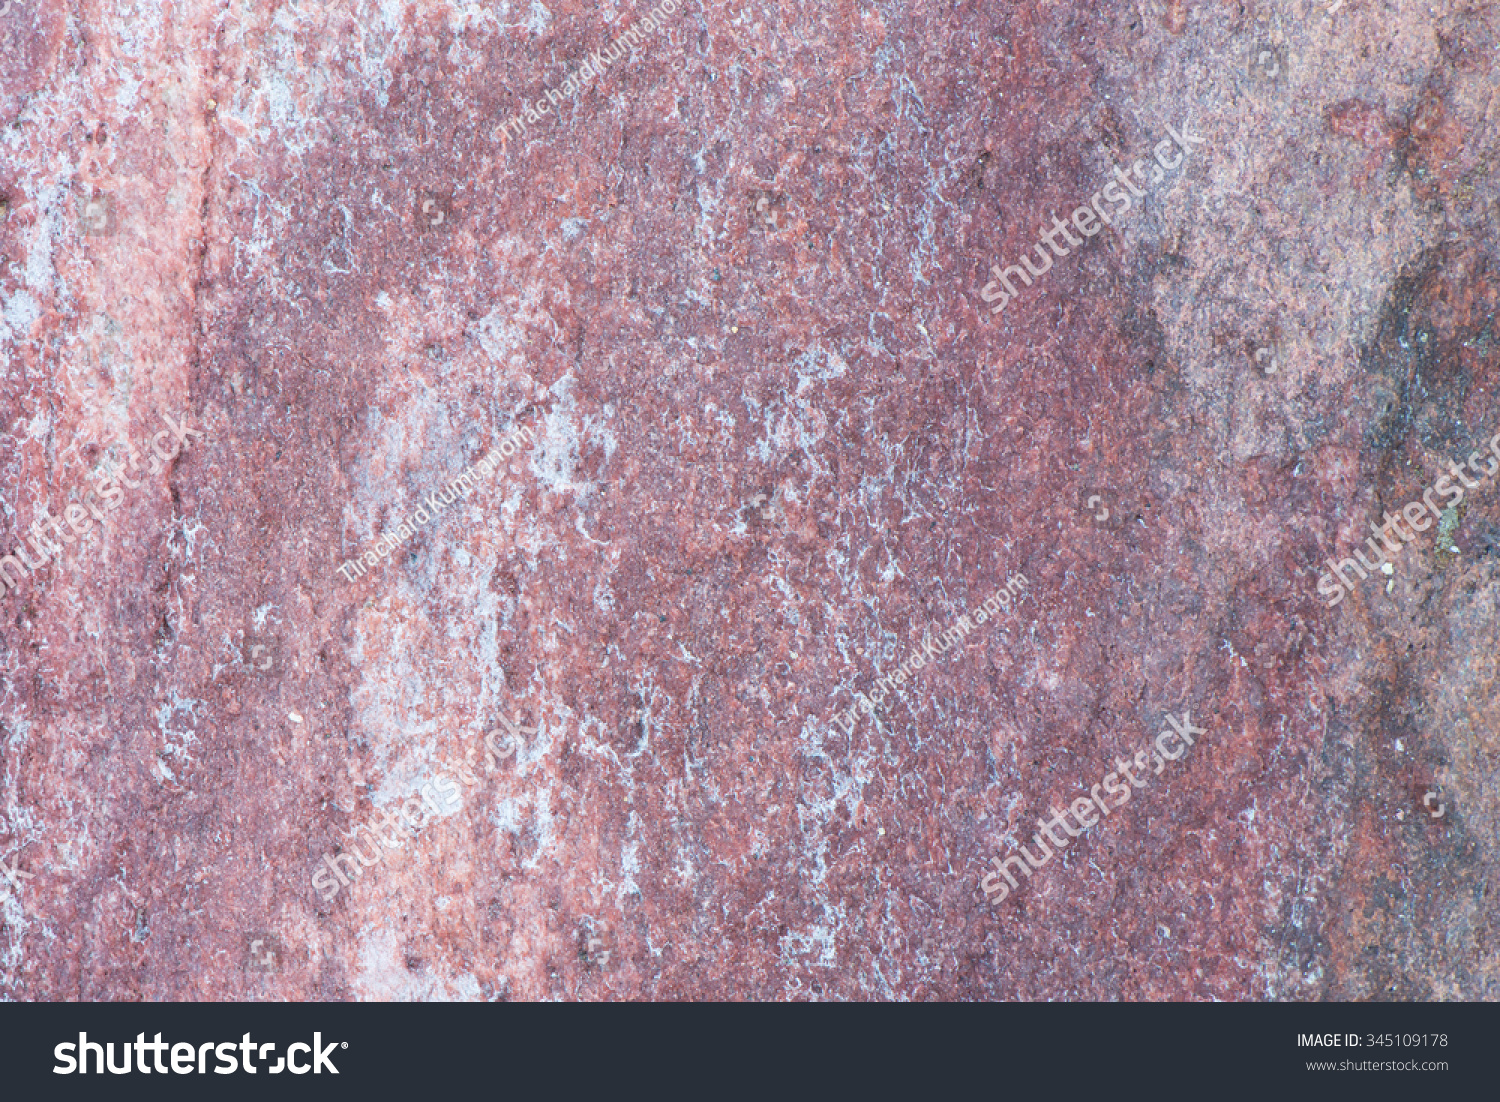 Surface of the marble with brown tint, stone texture and background. Imagination of the nature. #345109178